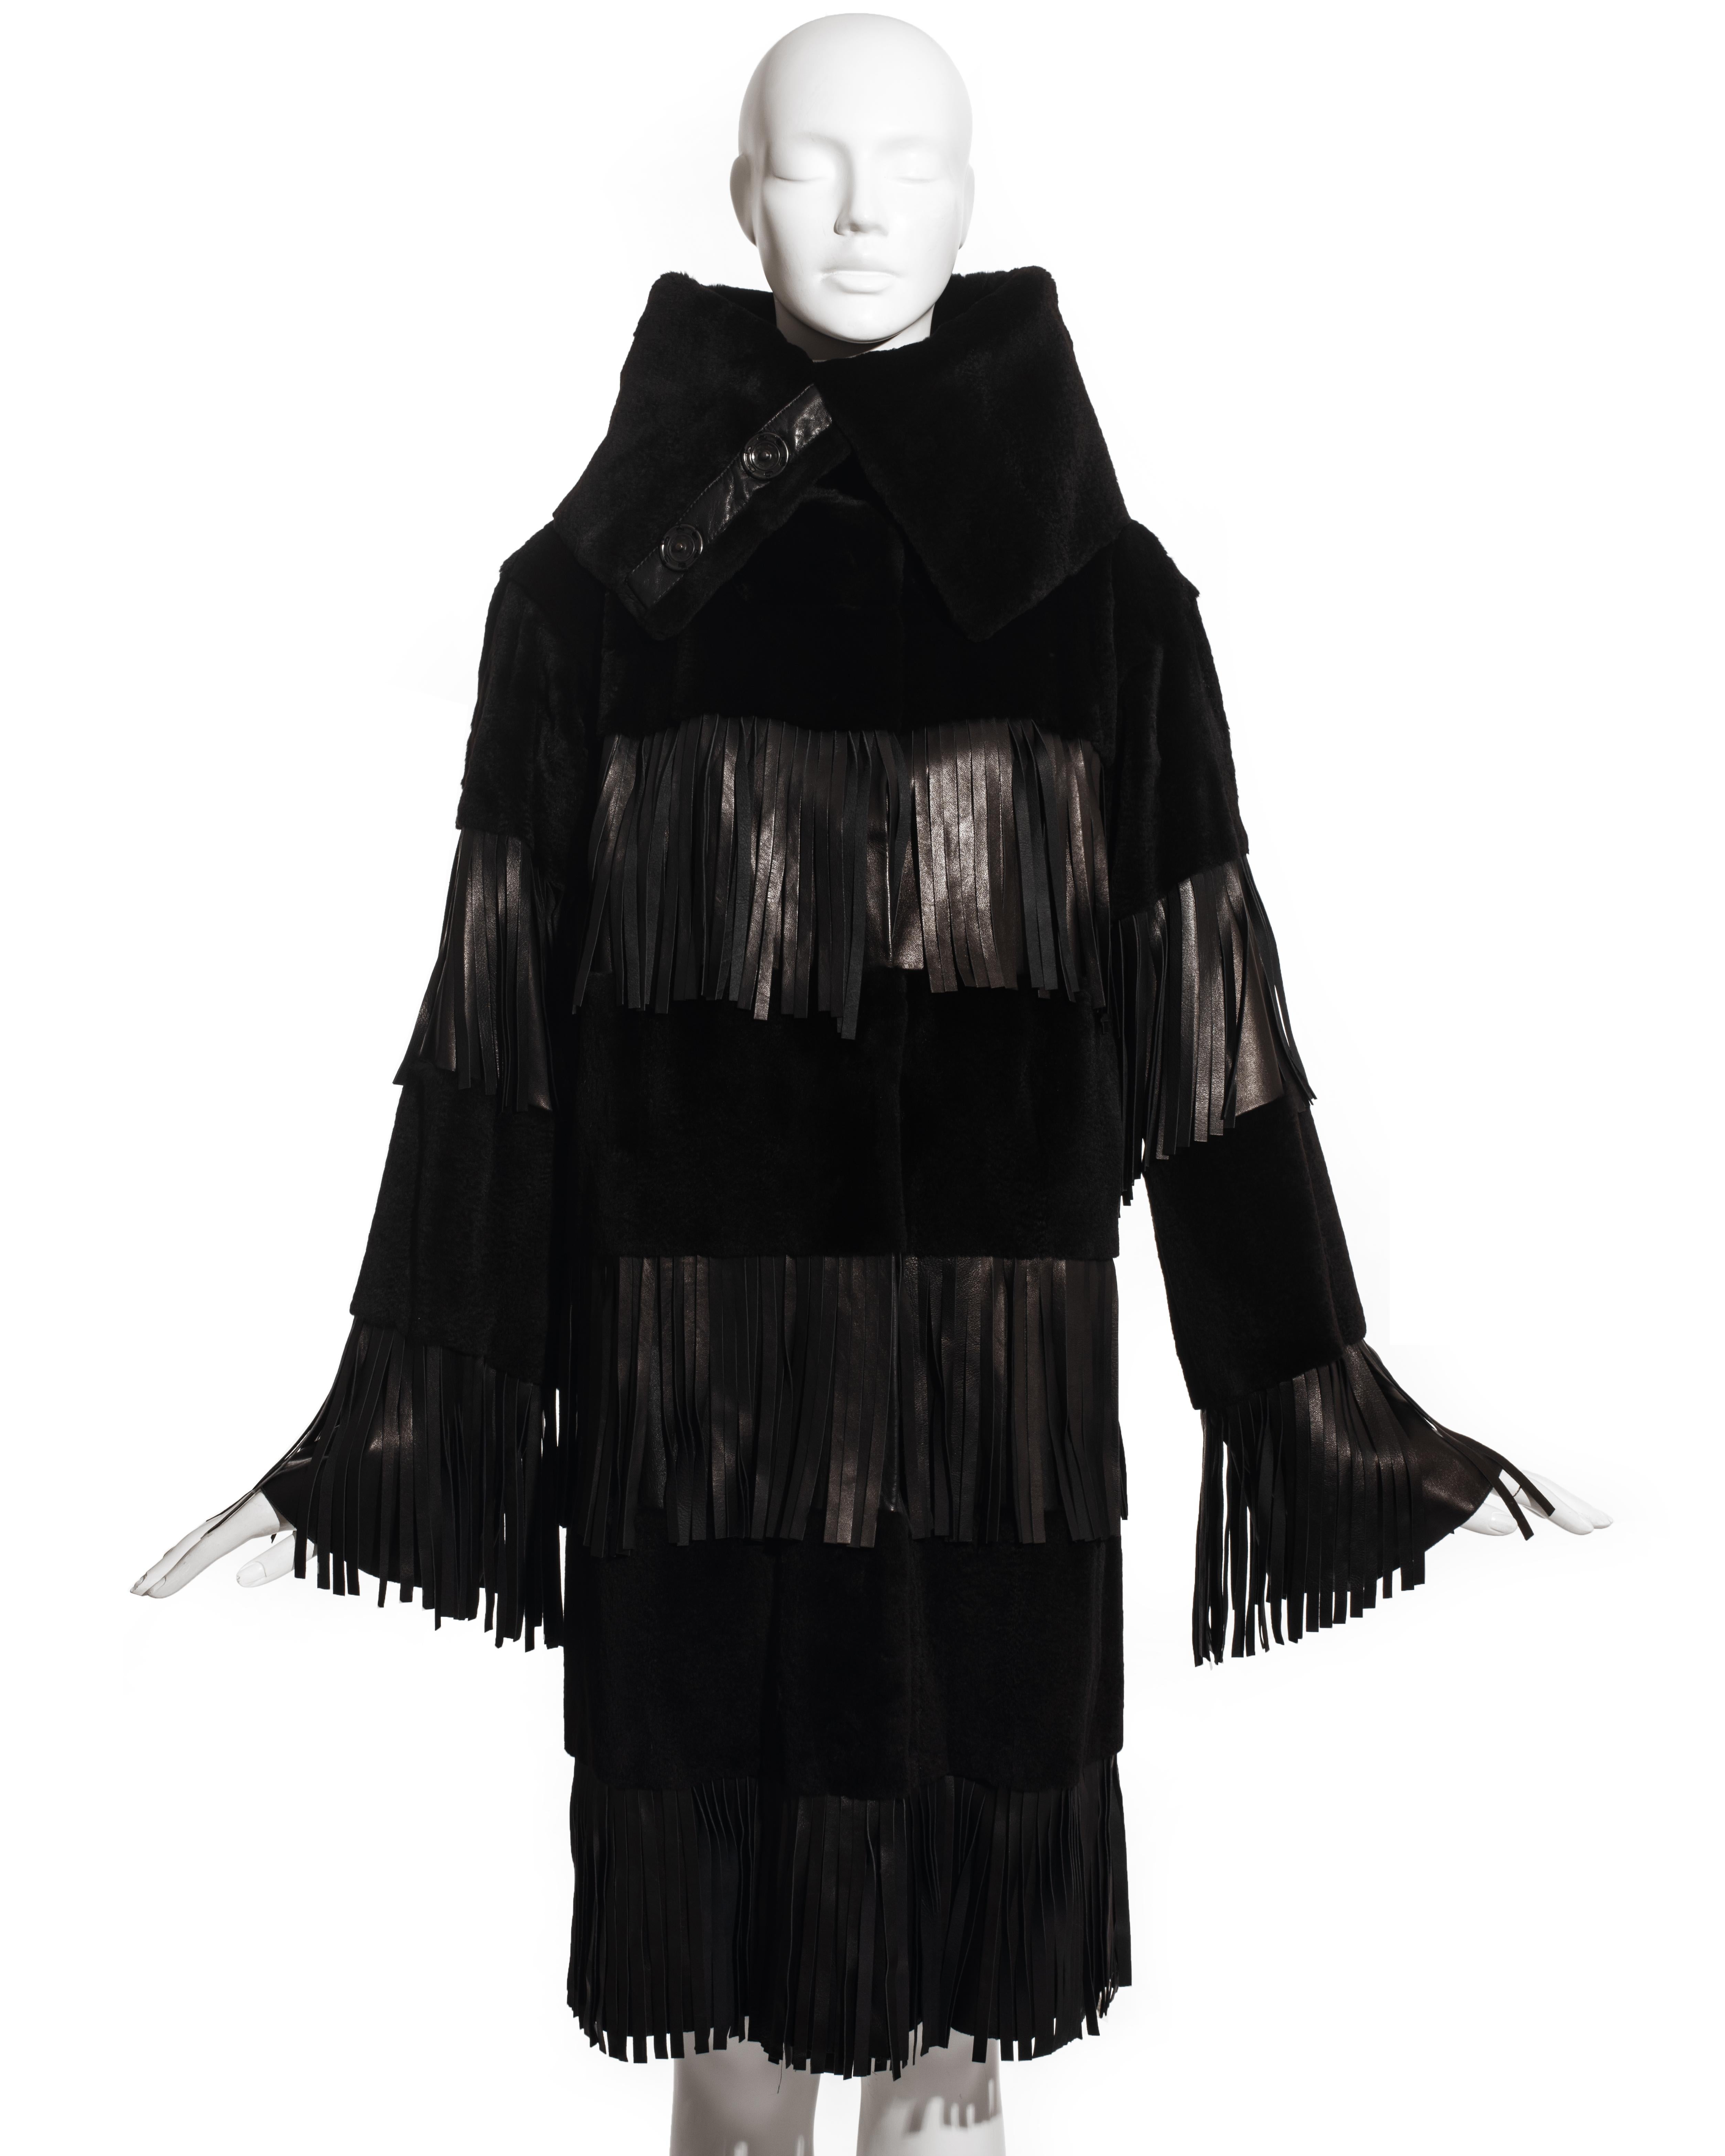 Dolce & Gabbana black weasel fur and lambskin leather coat with high turn-over collar, large snap fastenings and leather fringed trim. 

Fall-Winter 2003